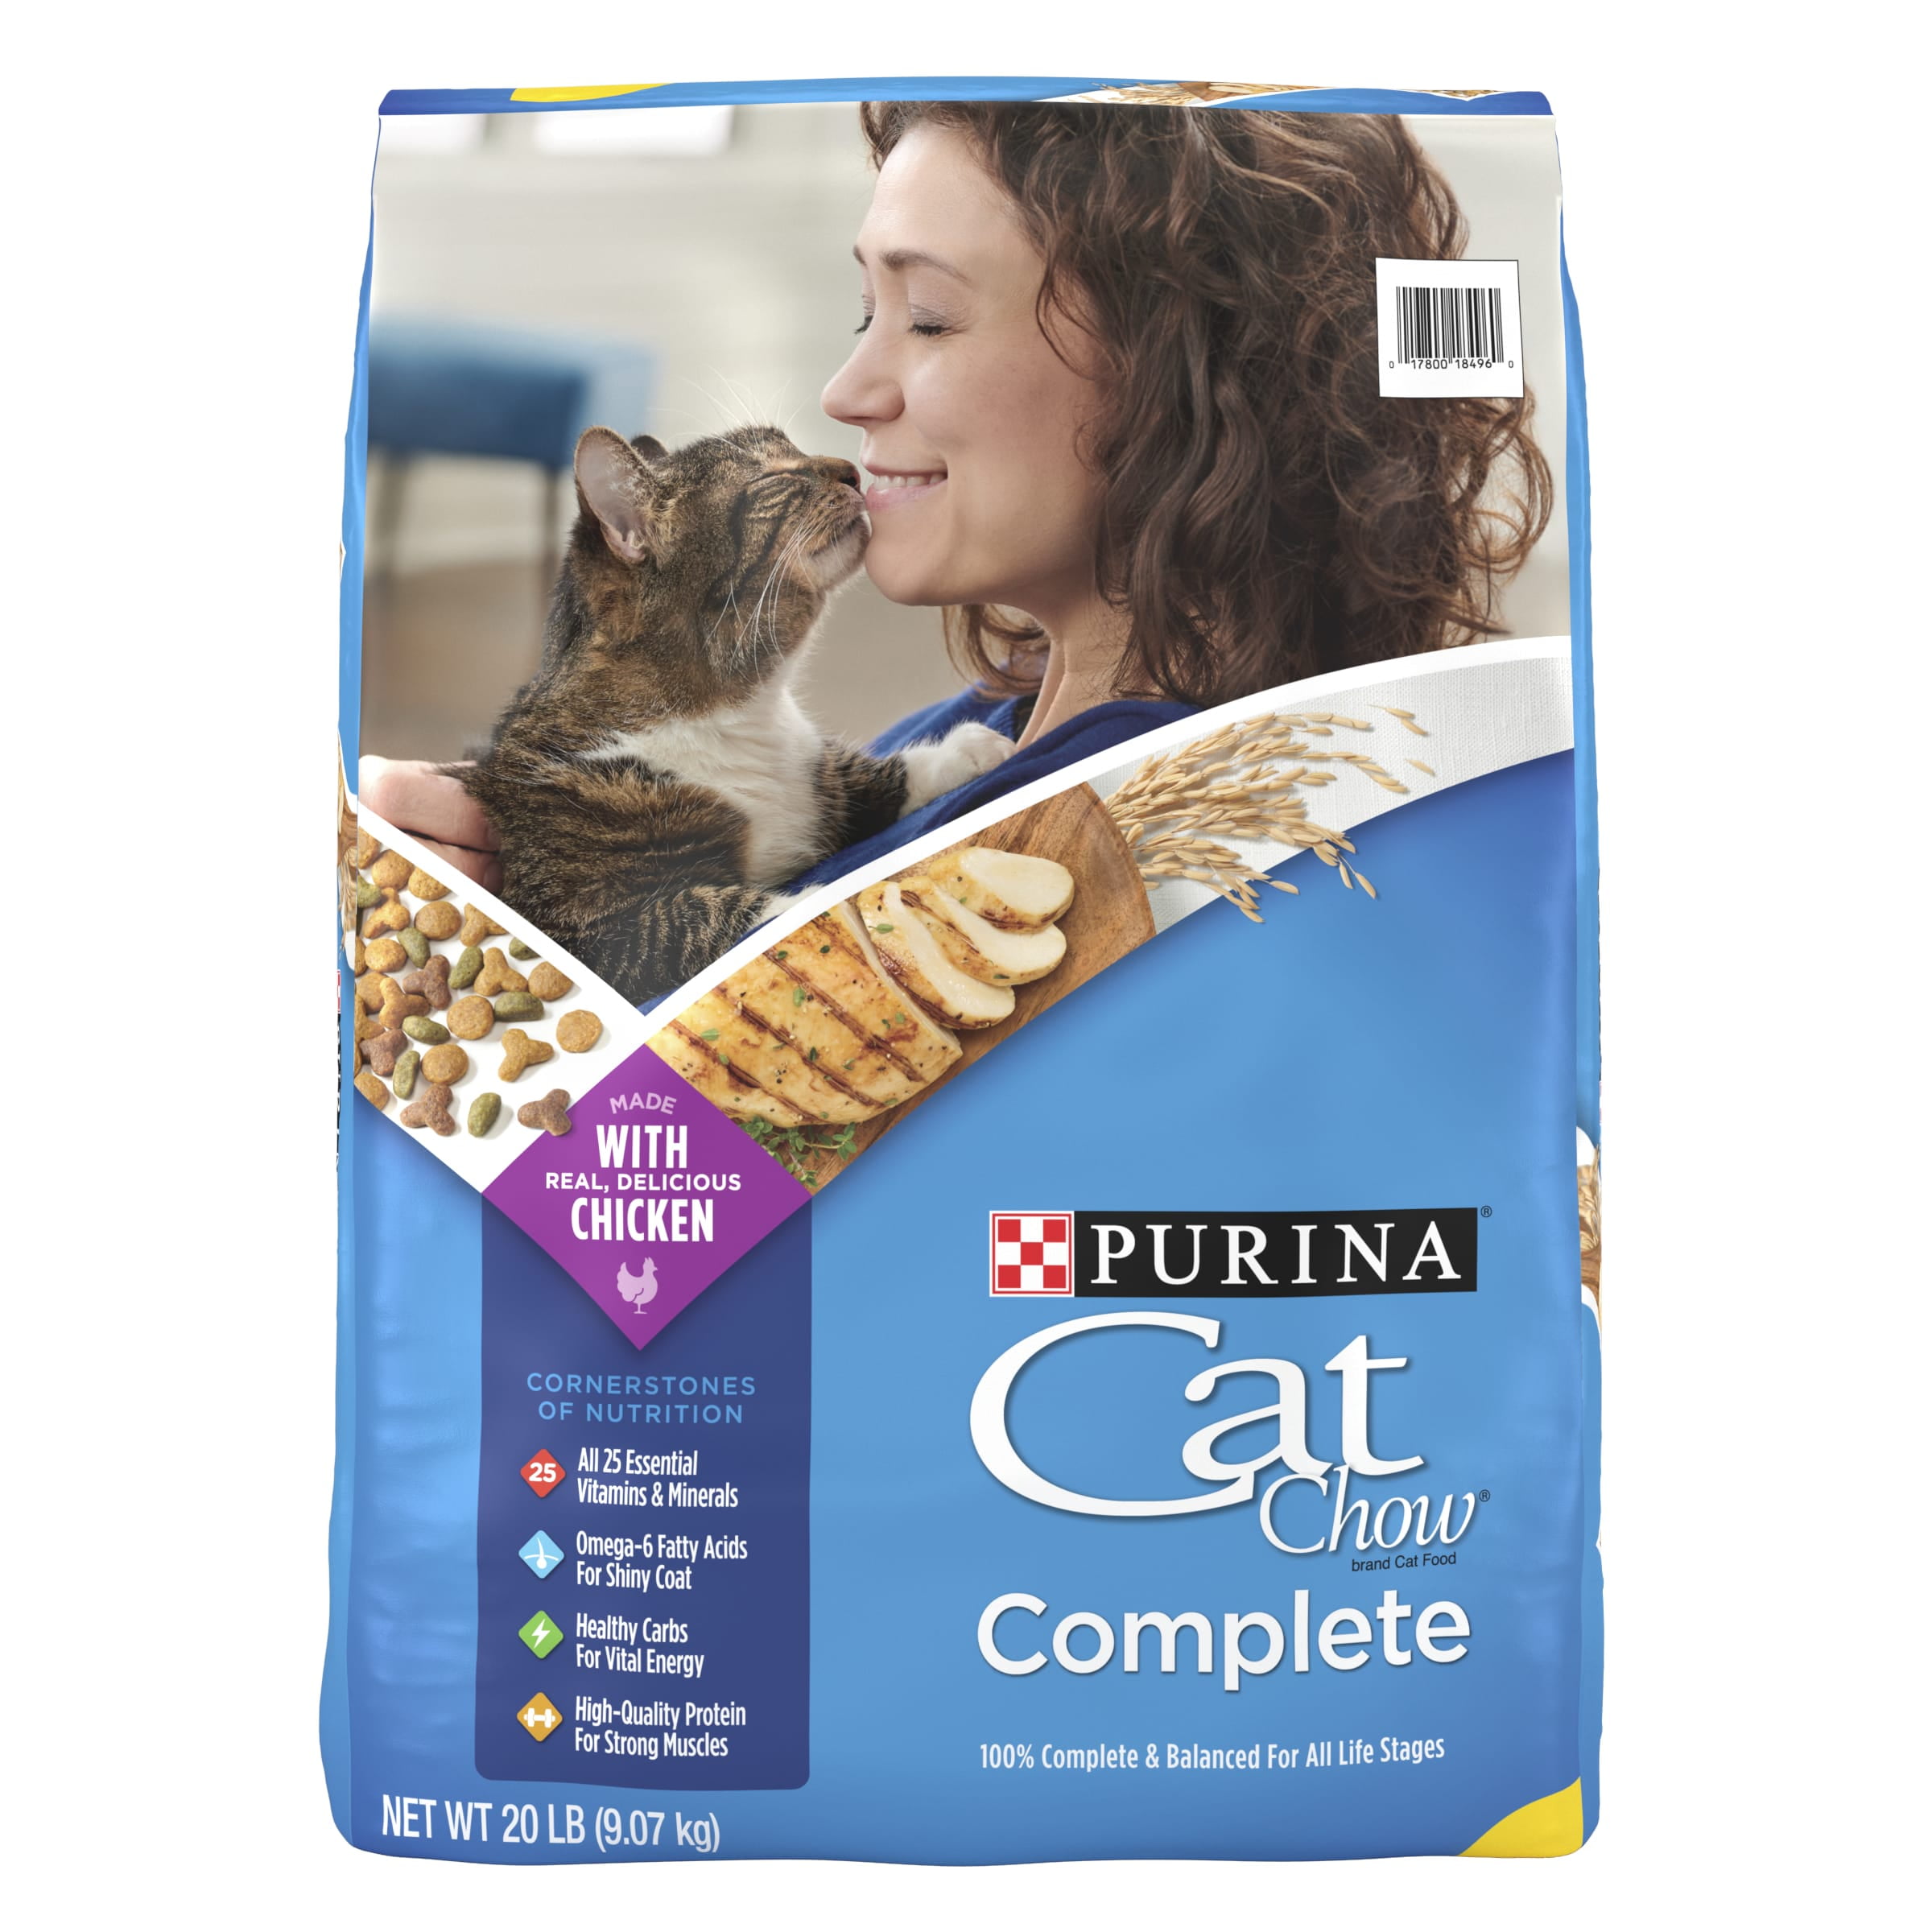 Purina Cat Chow Complete Dry Cat Food, 20 lb image